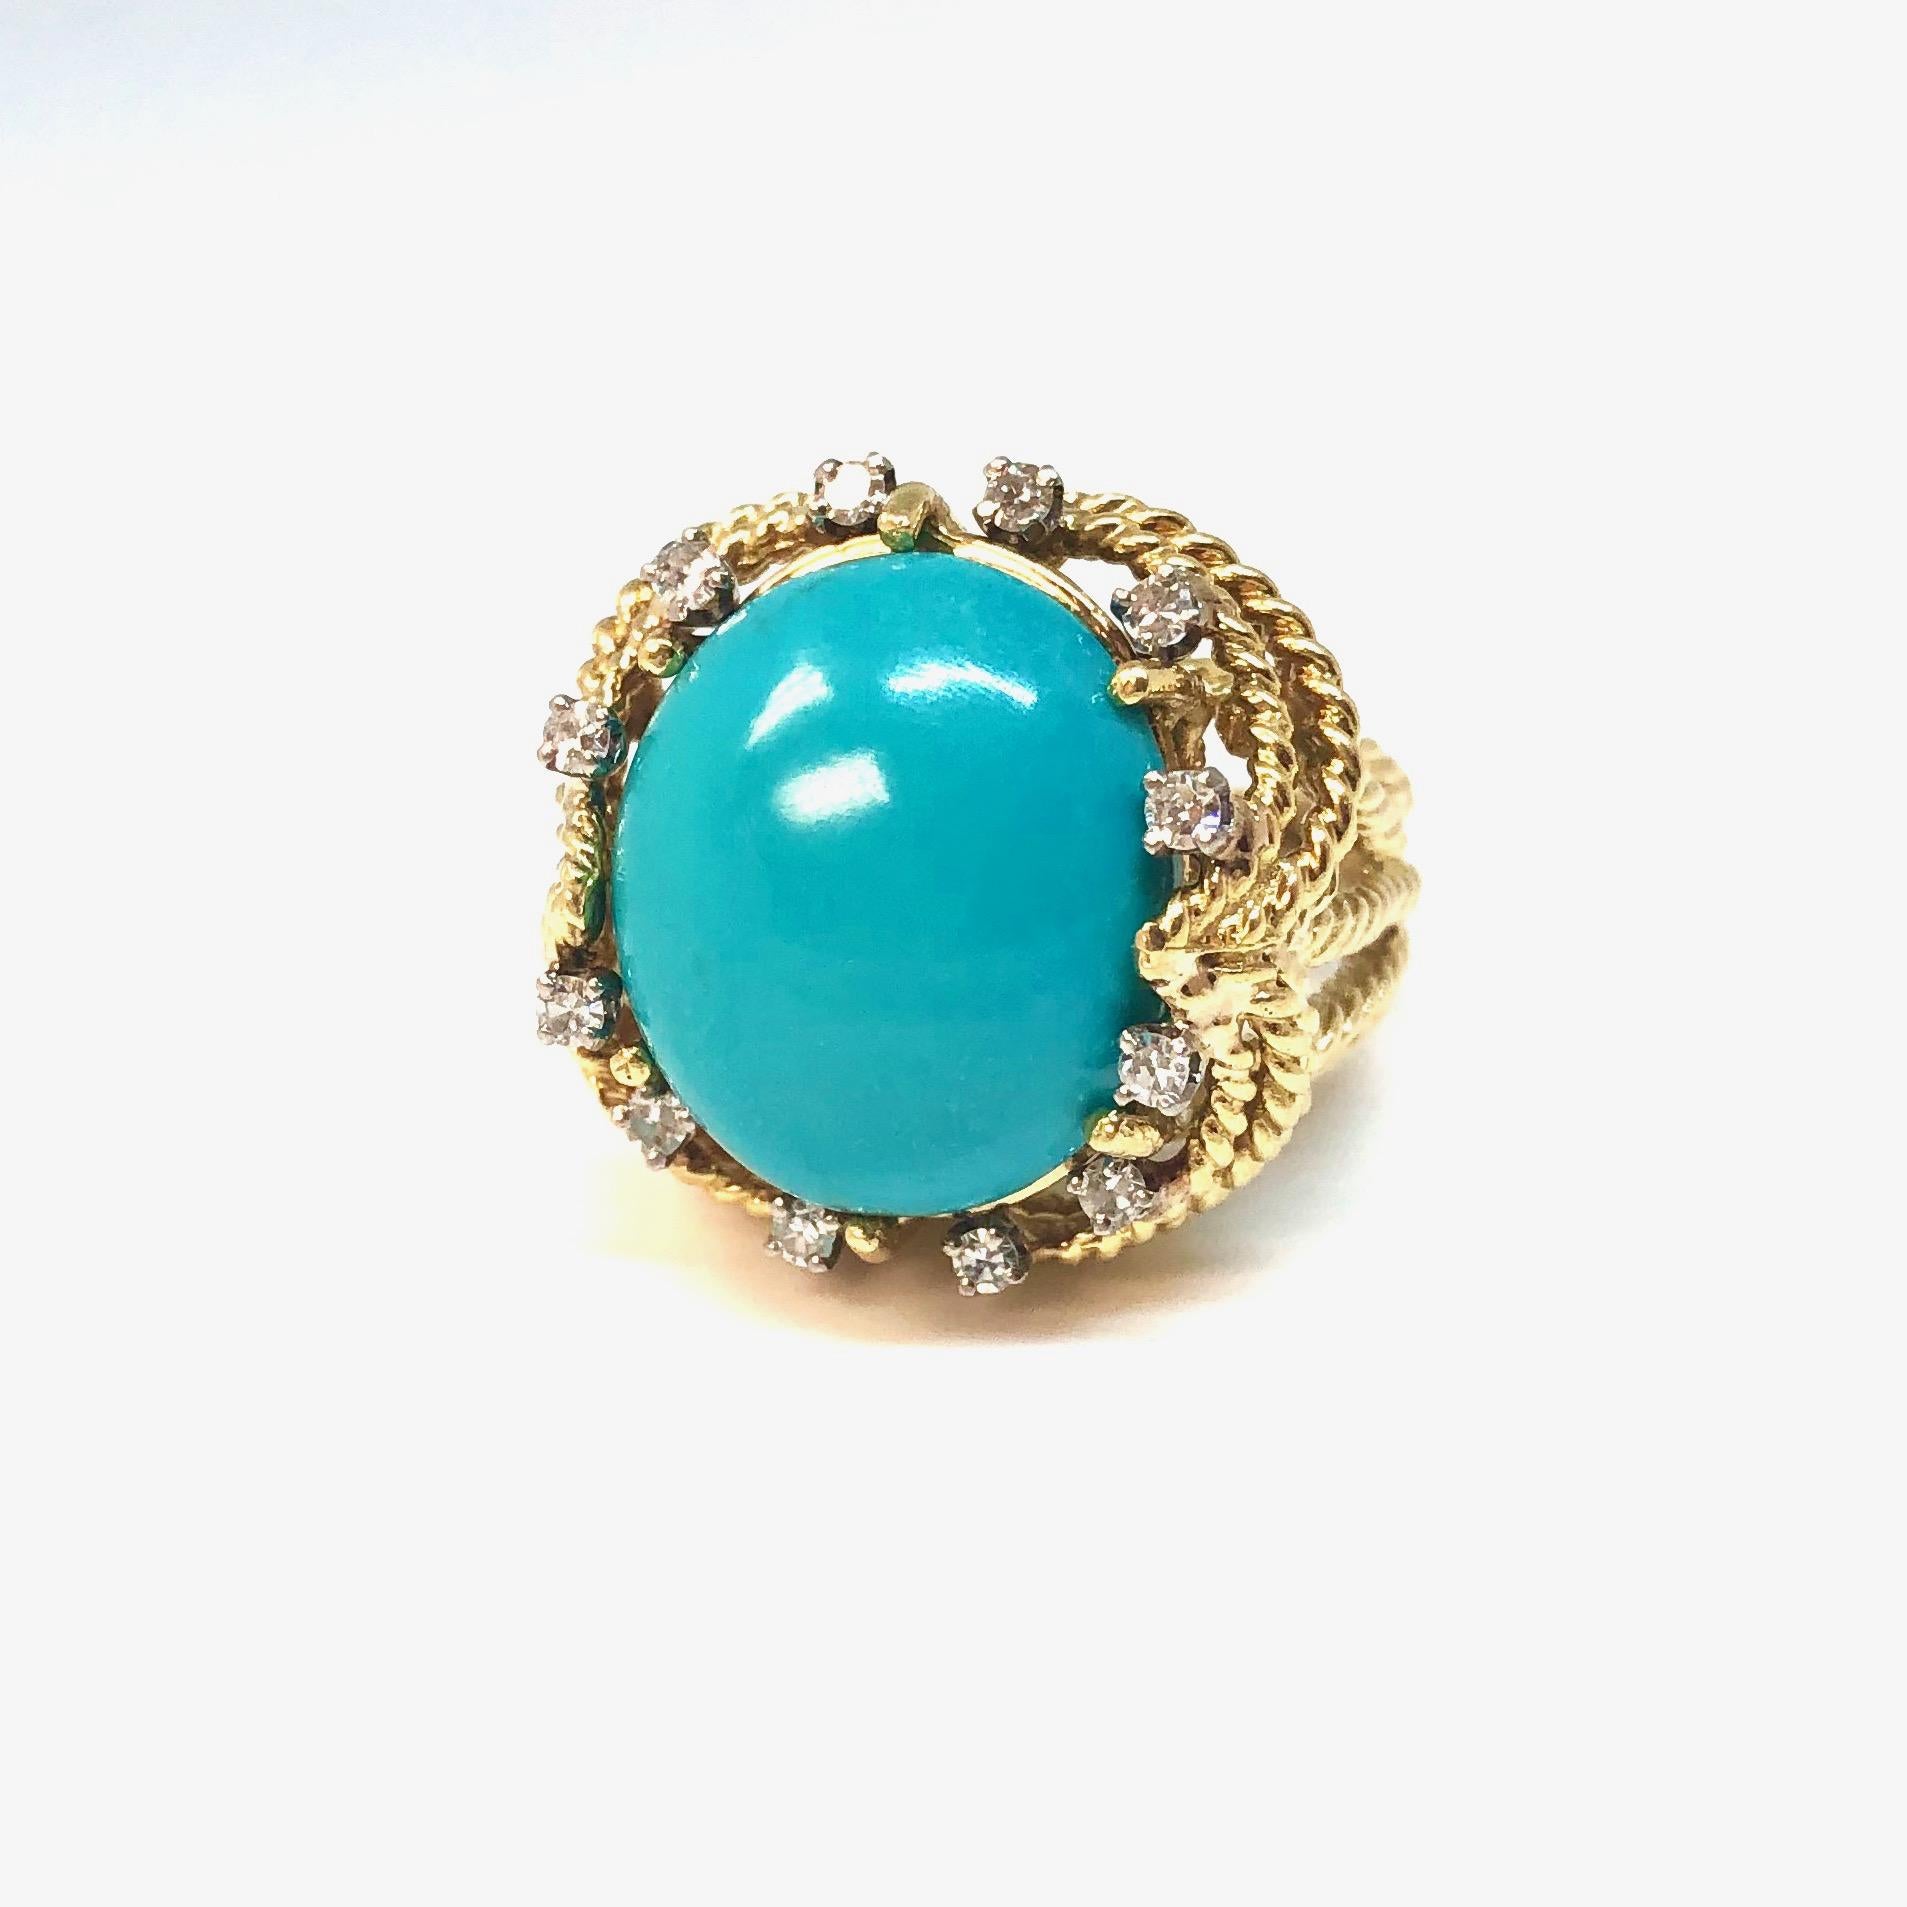 Crafted in 18K yellow gold, the ring features an oval cabochon natural turquoise accented by diamonds, supported by a rope style design multi-wire setting. 12 single cut diamonds, approximate total weight: 0.35ct. Color: G-H, Clarity: